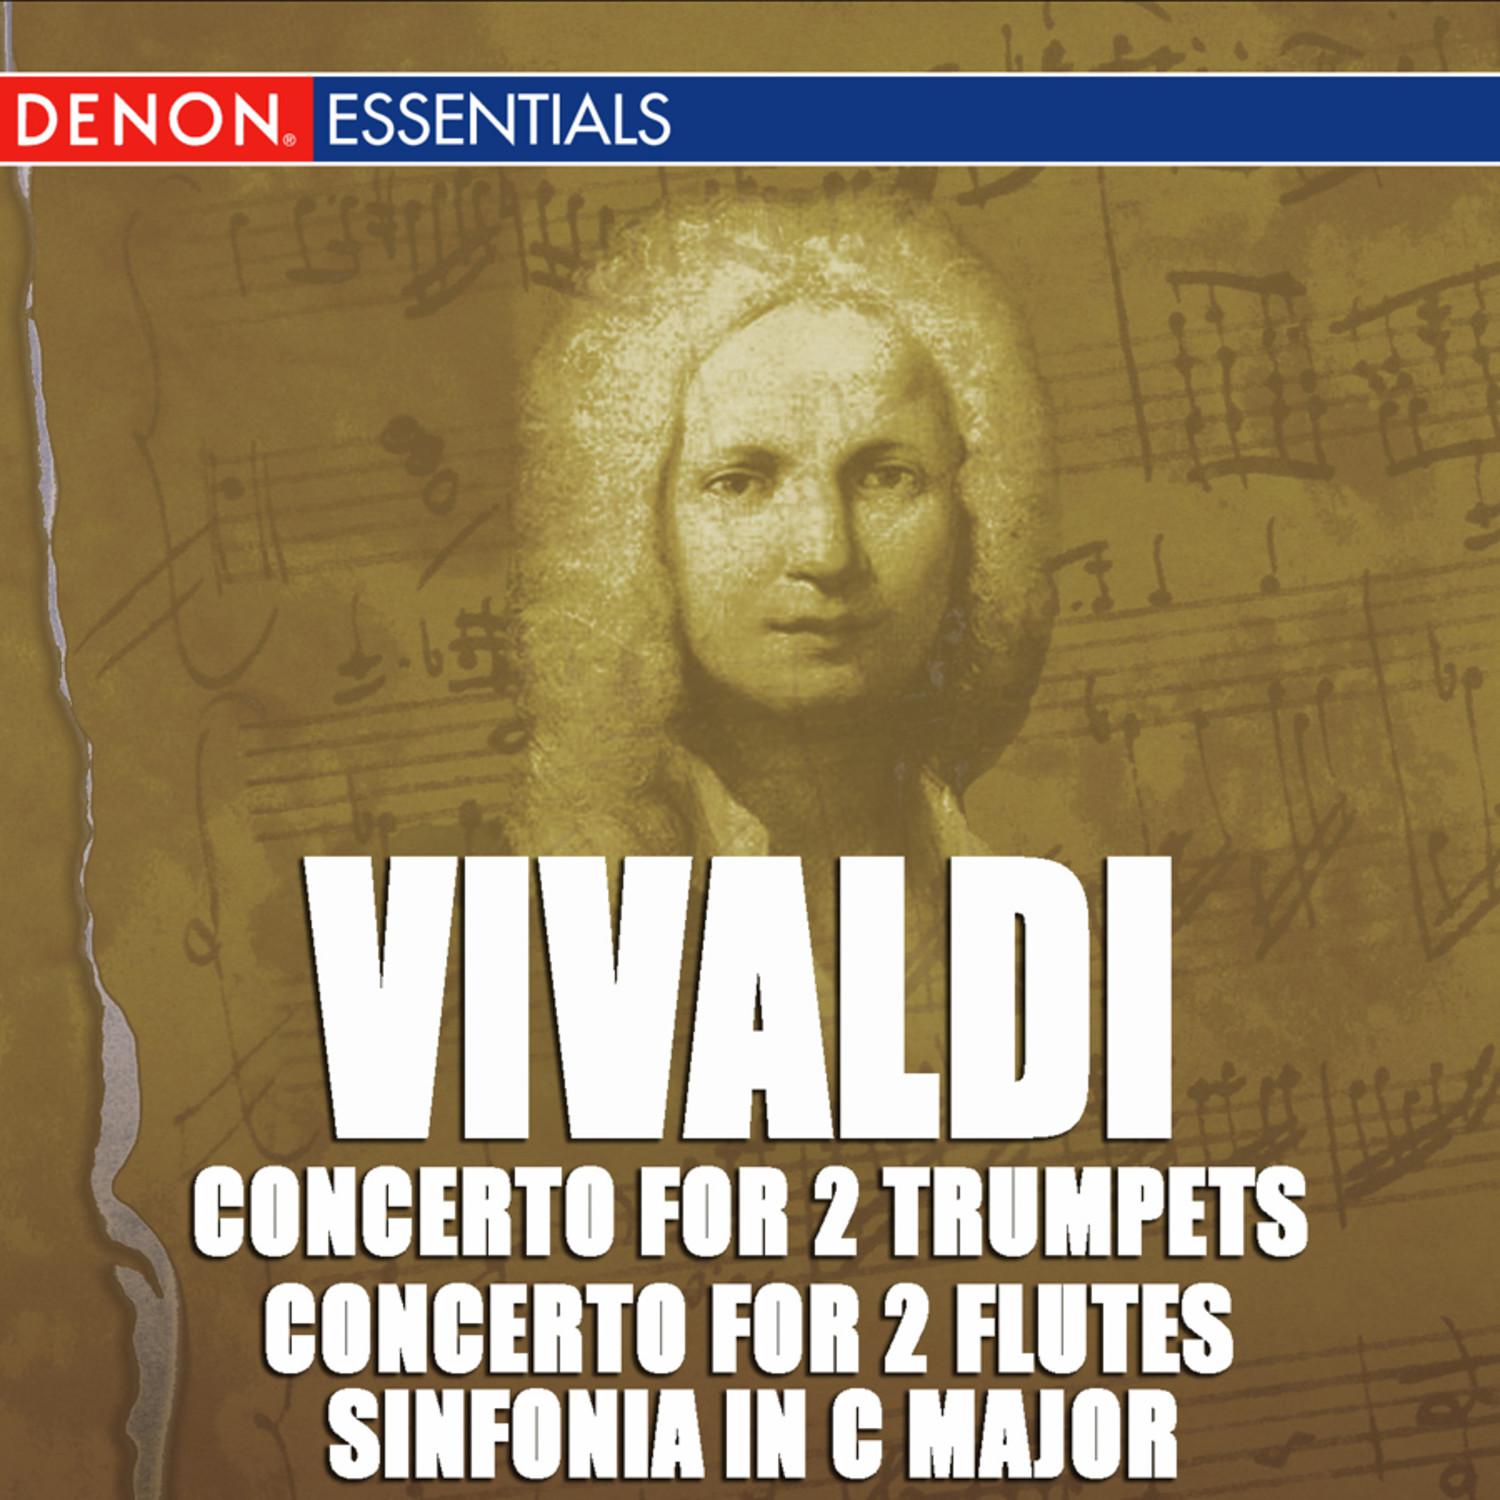 Concerto for 2 Flutes, Strings and Harpsichord Op. 10 in C Major, RV 533: I. Allegro molto